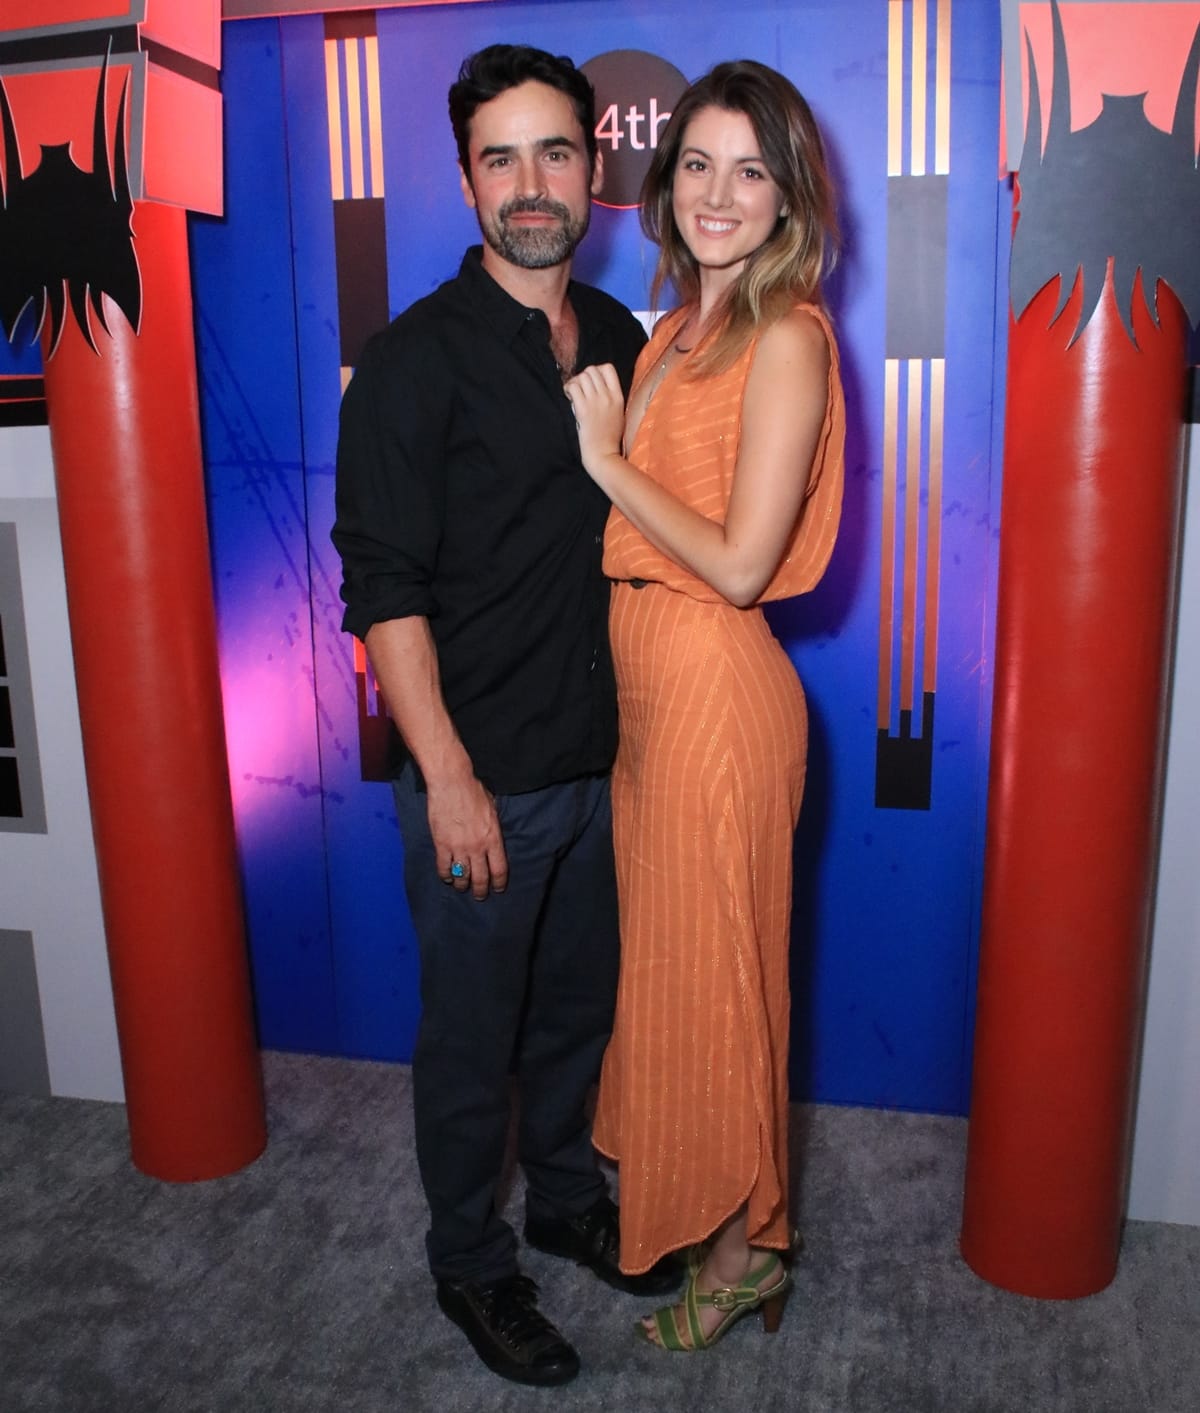 Jesse Bradford and his wife Andrea Watrouse at the opening night of the 14th HollyShorts Film Festival